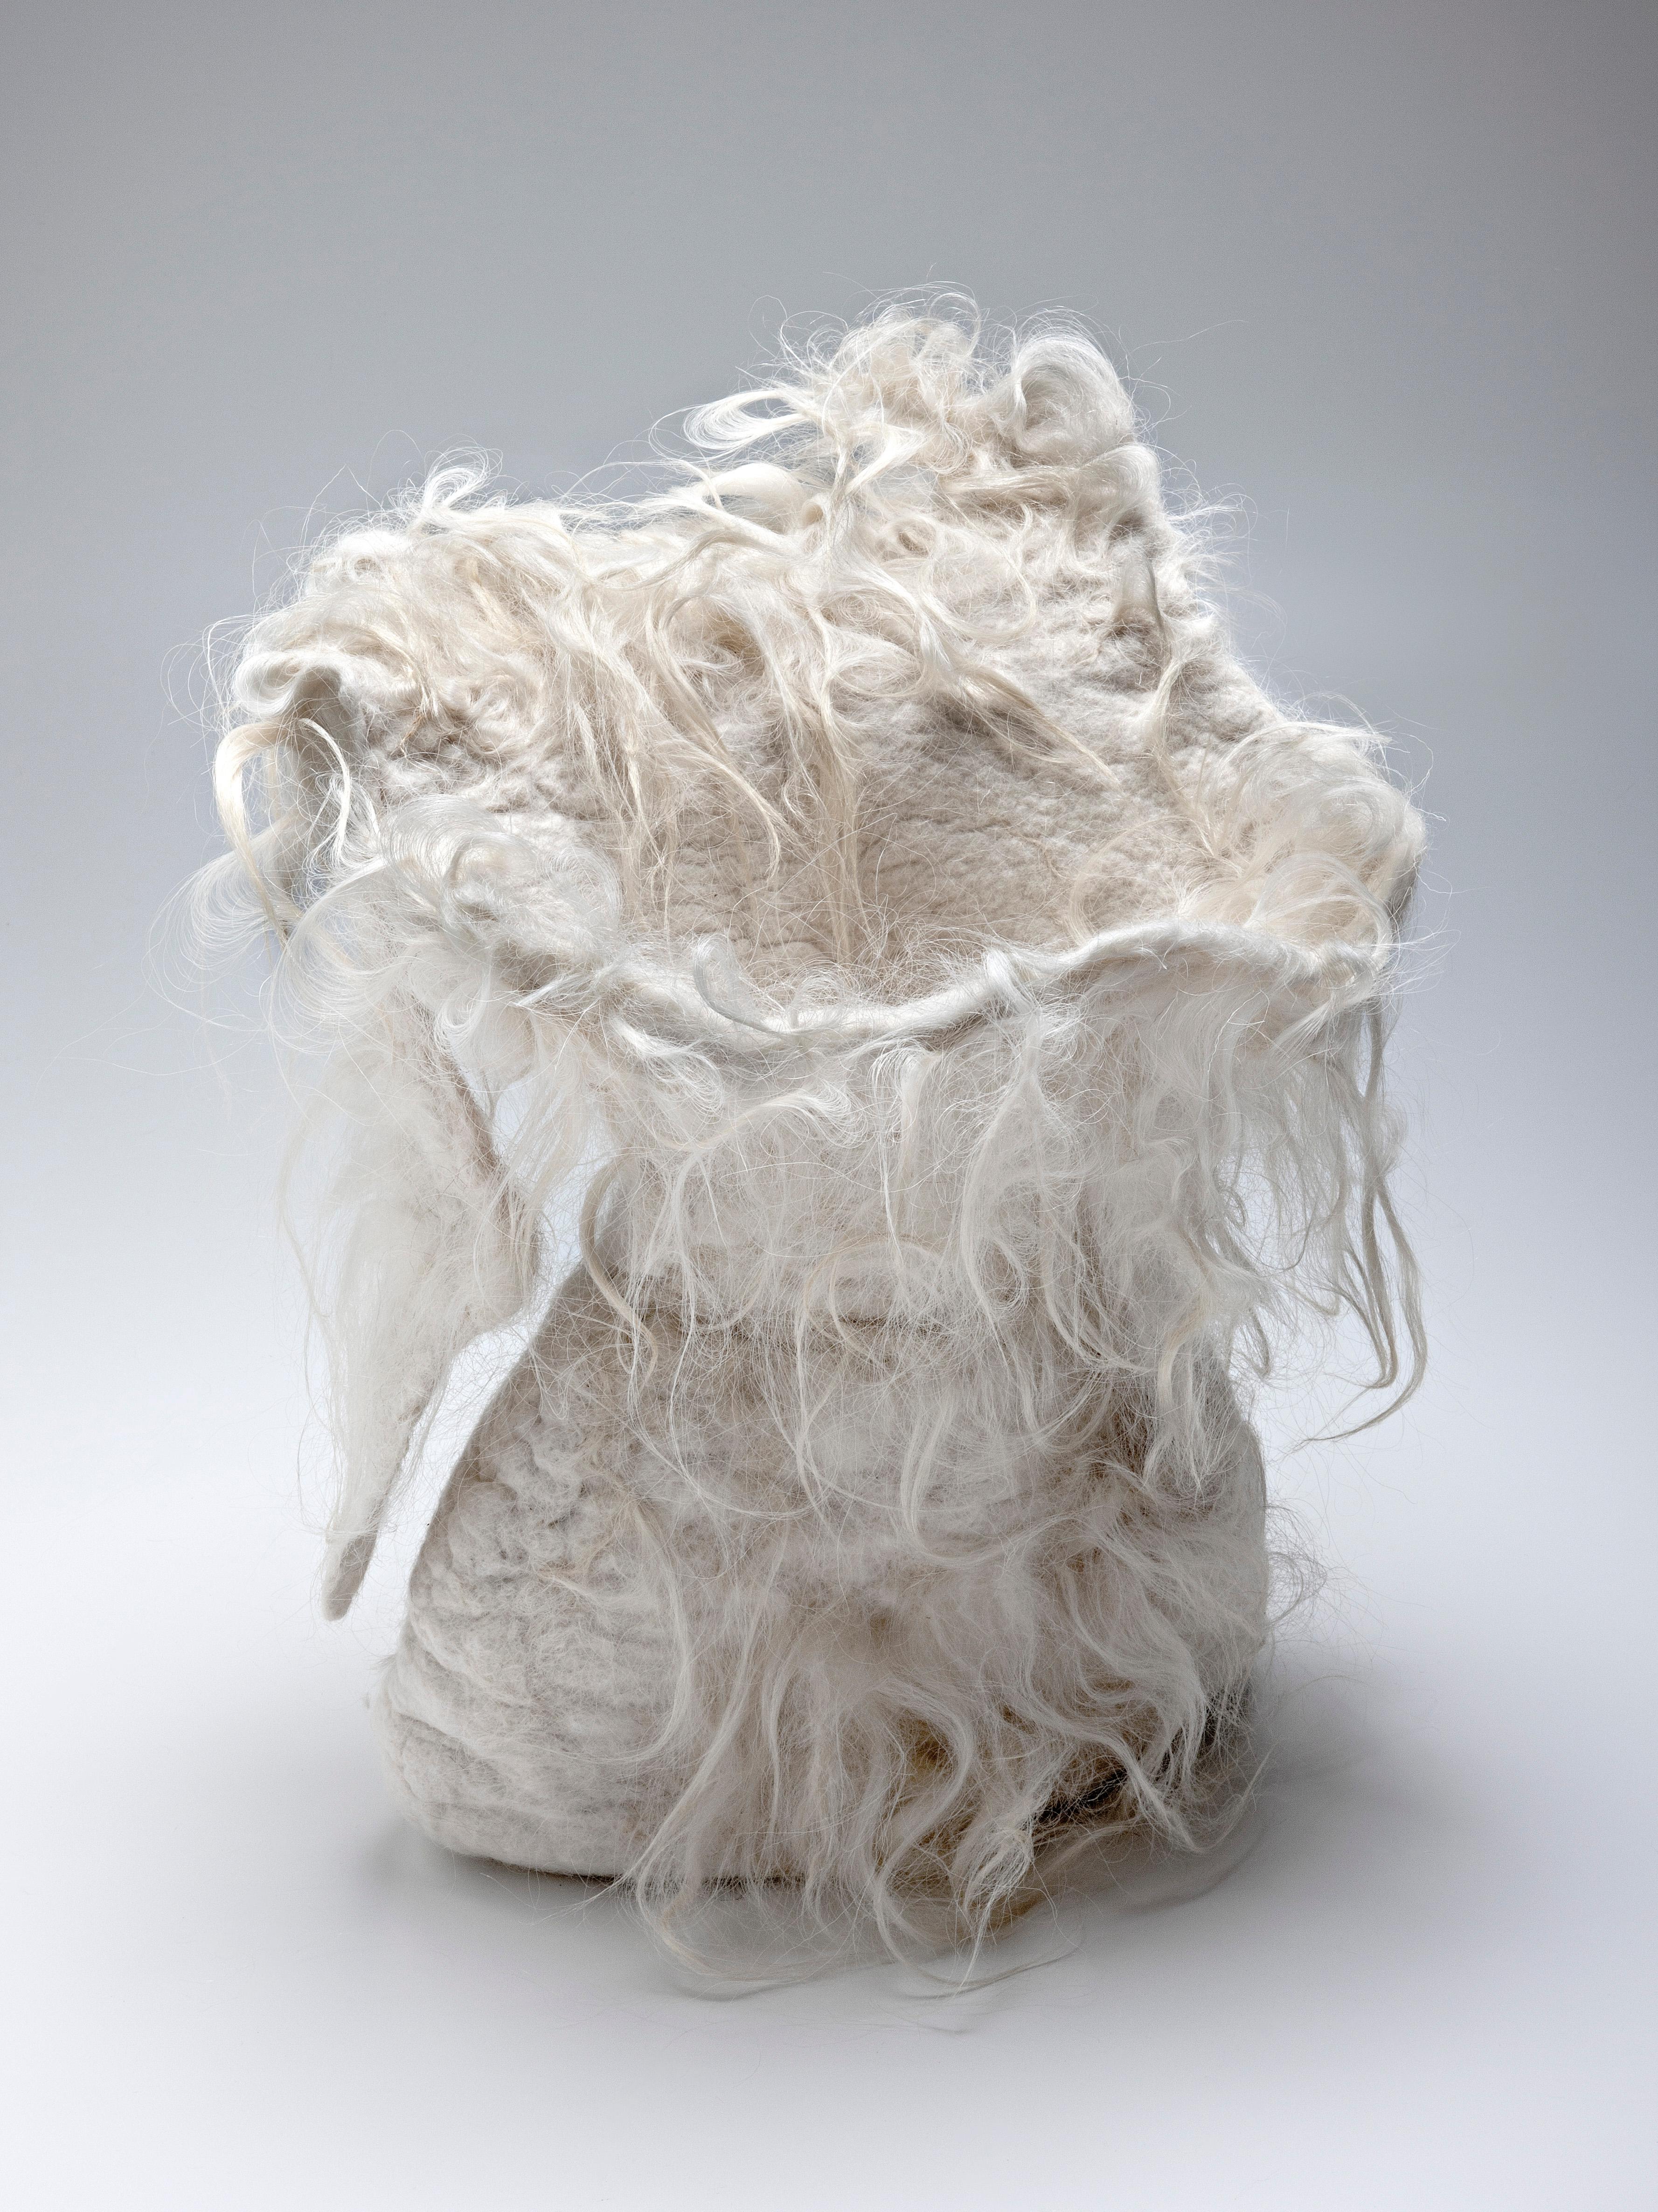 “Mormaço” Naturally Dyed Felted Wool Vase by Inês Schertel, Brazil, 2021

Ines Schertel's primary material is sheep's wool. As a practitioner of Slow Design, the artist takes a holistic approach to textile design, personally overseeing the whole